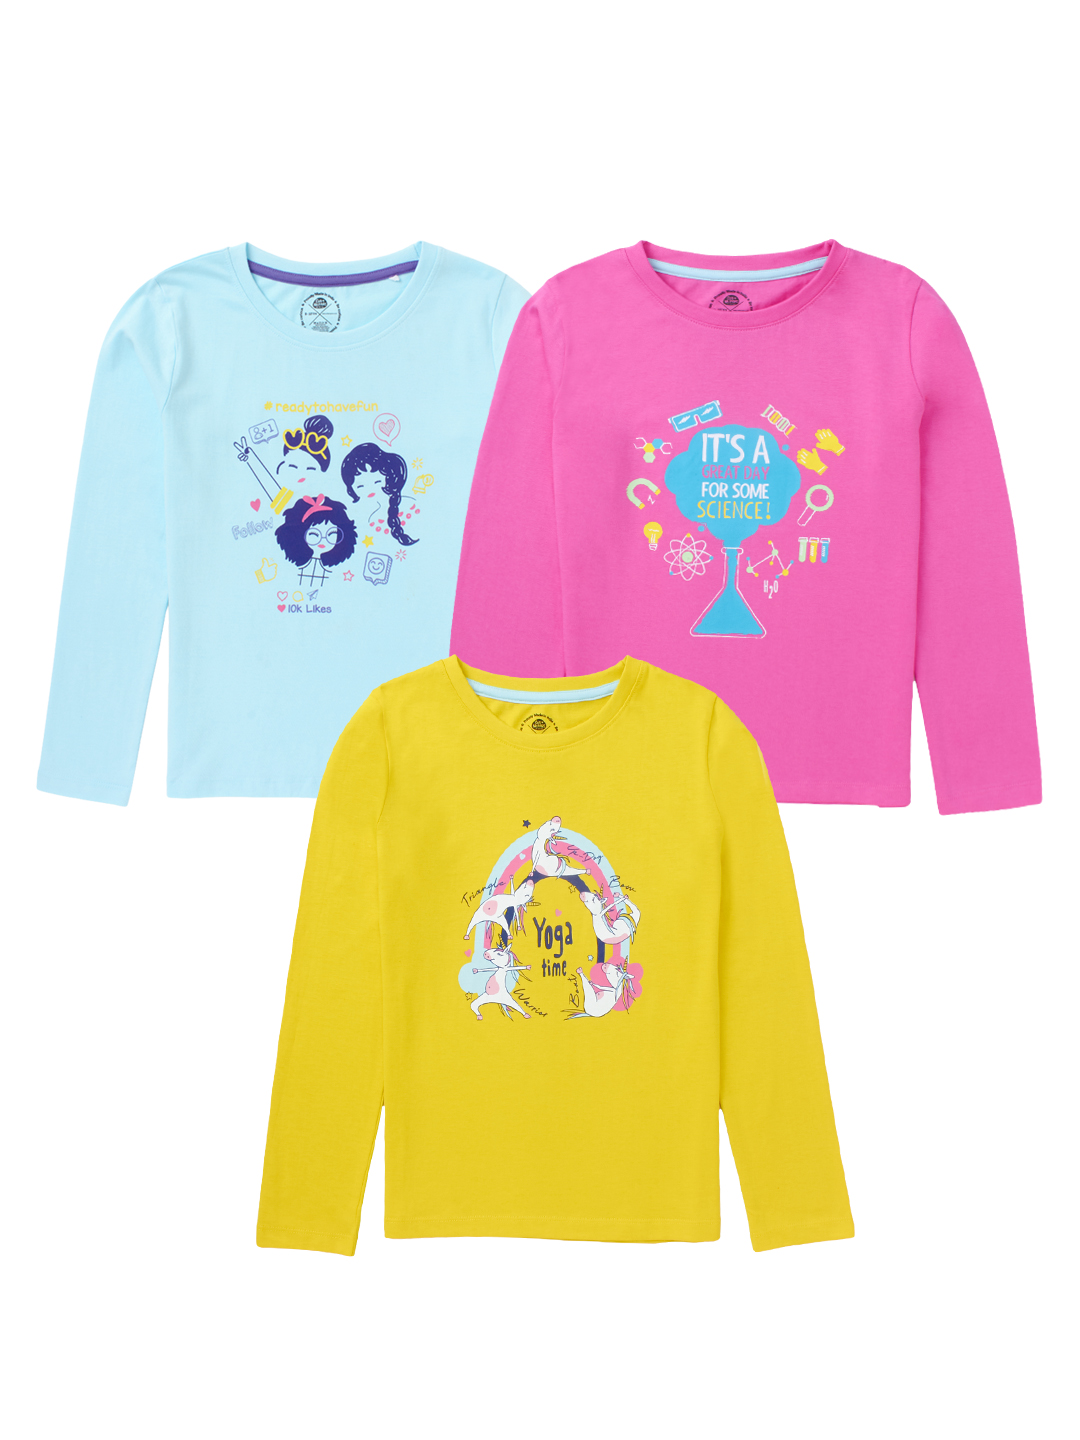 Girls Pack of 3 Full Sleeve T-Shirts - Multicolored